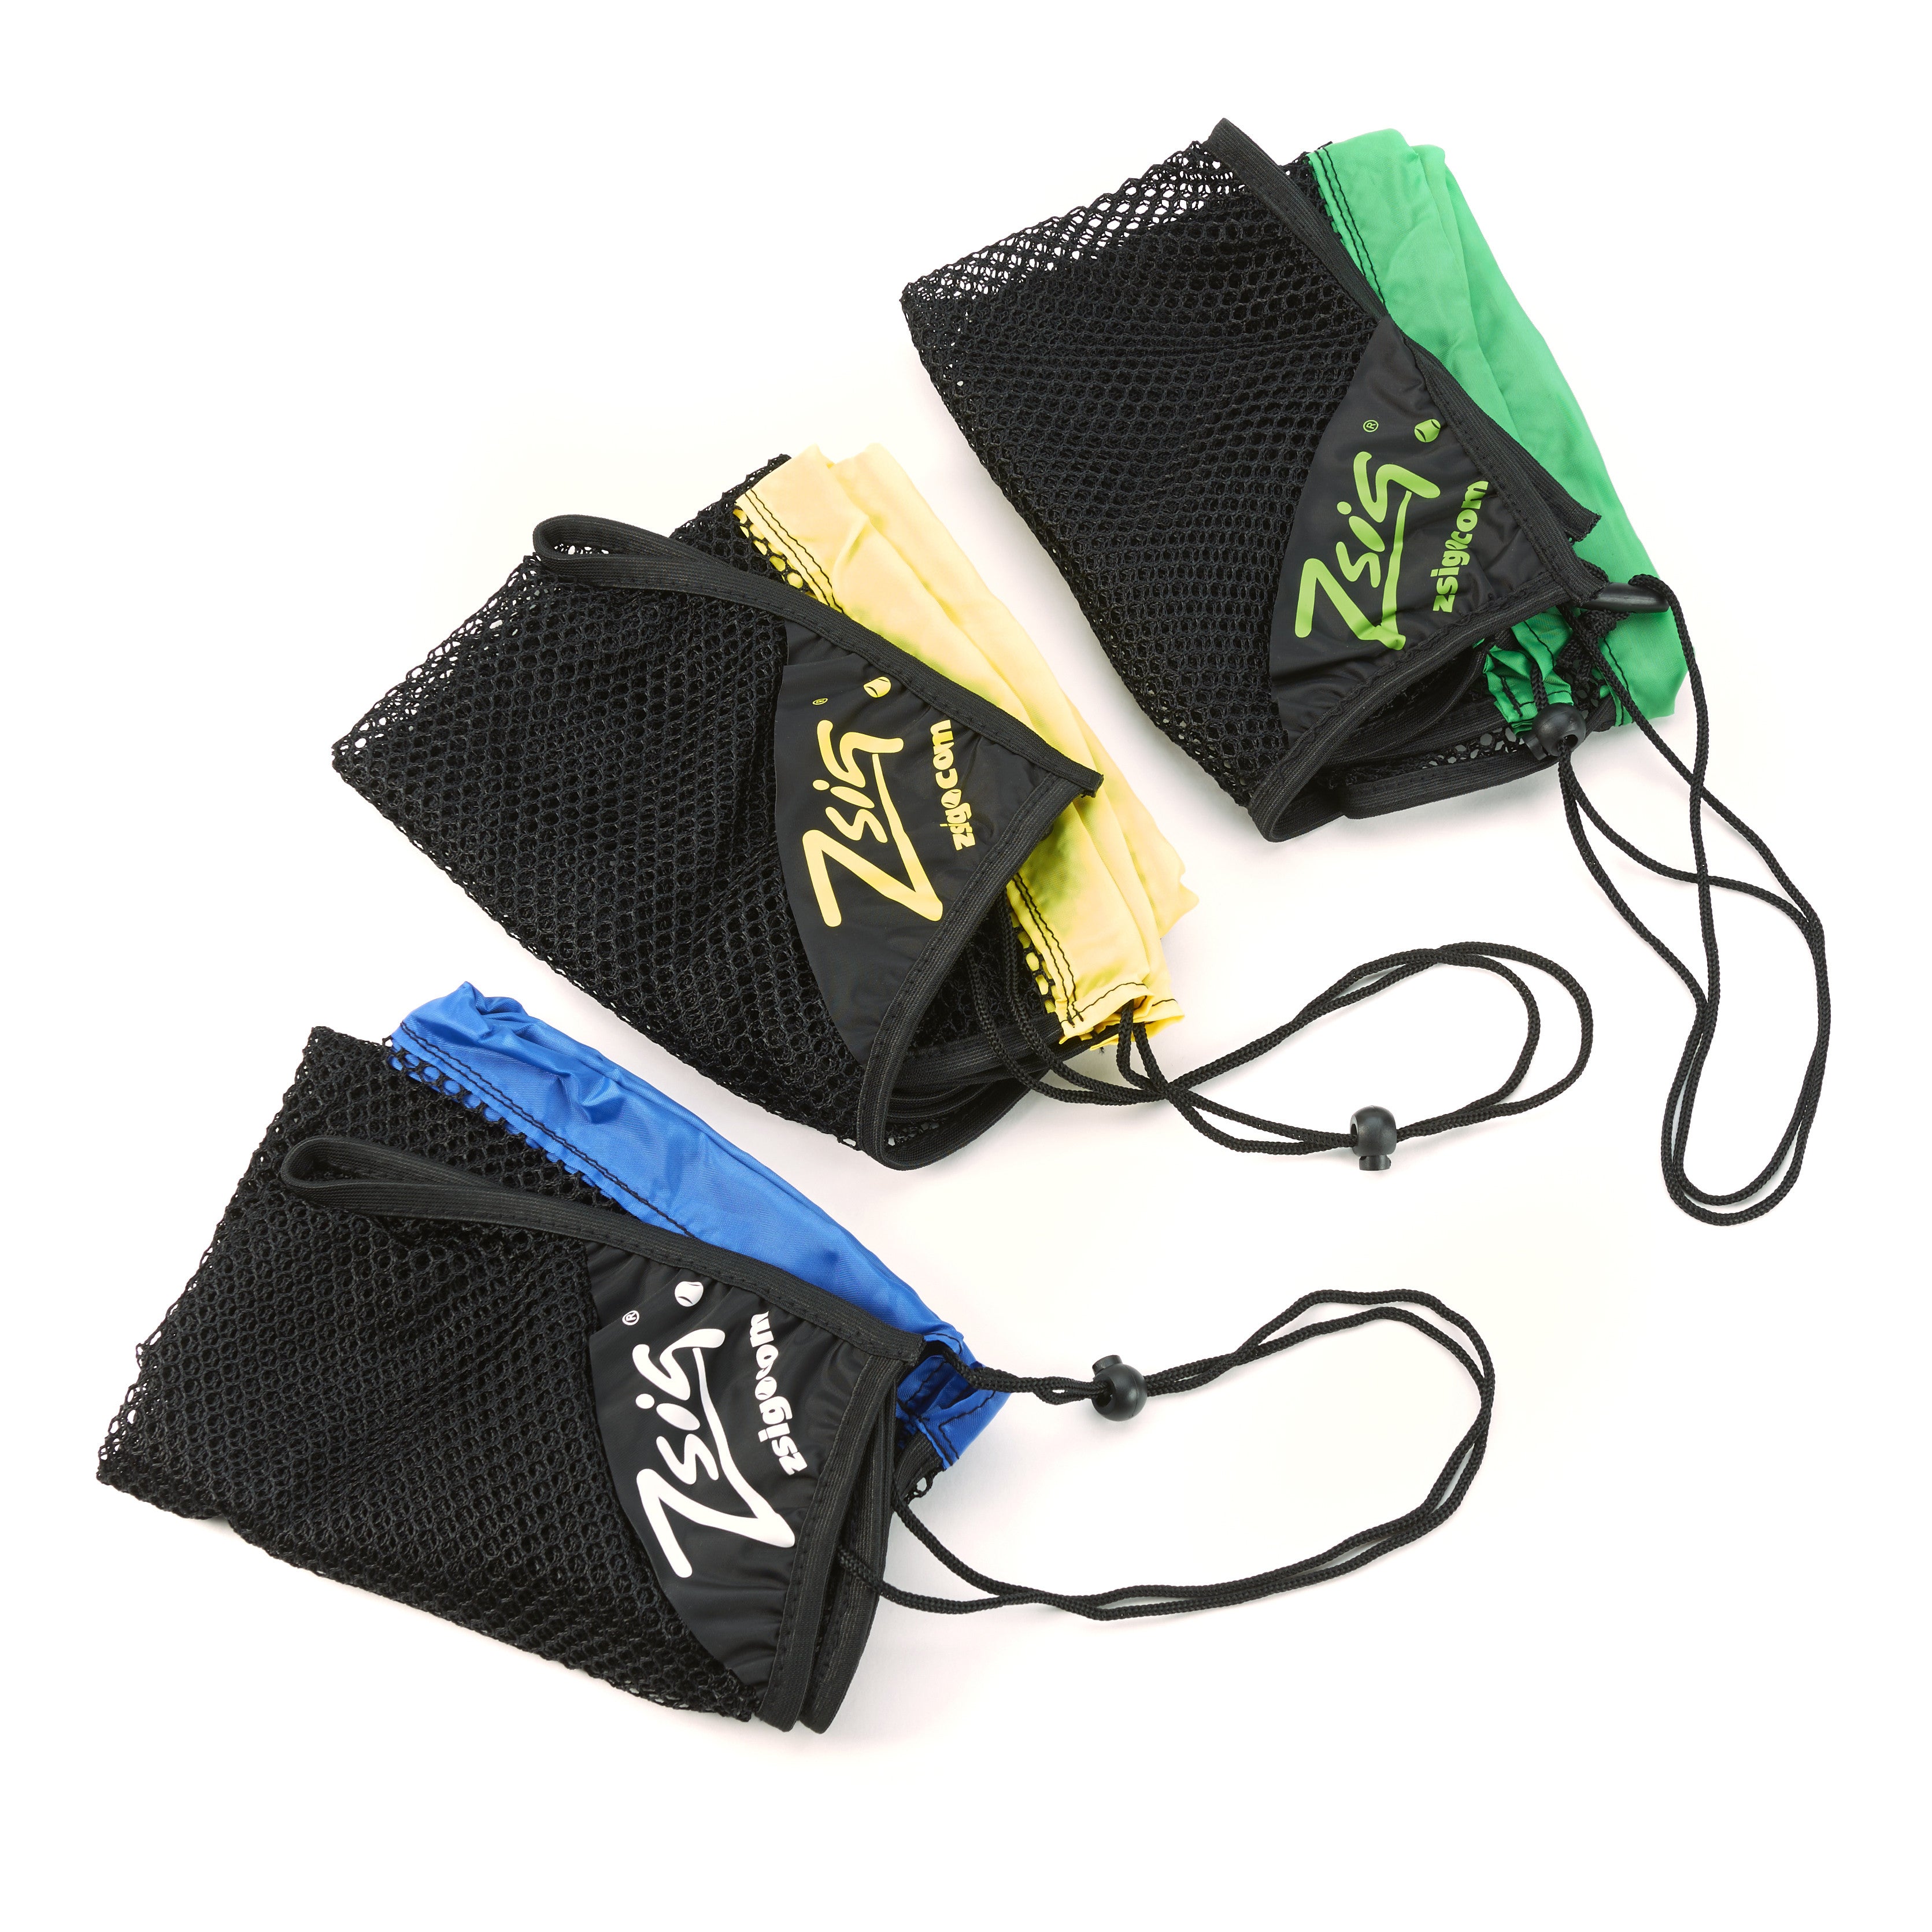 Tennis Ball 5-dozen ball drawstring carry bags. Blue, yellow and green colourway options.